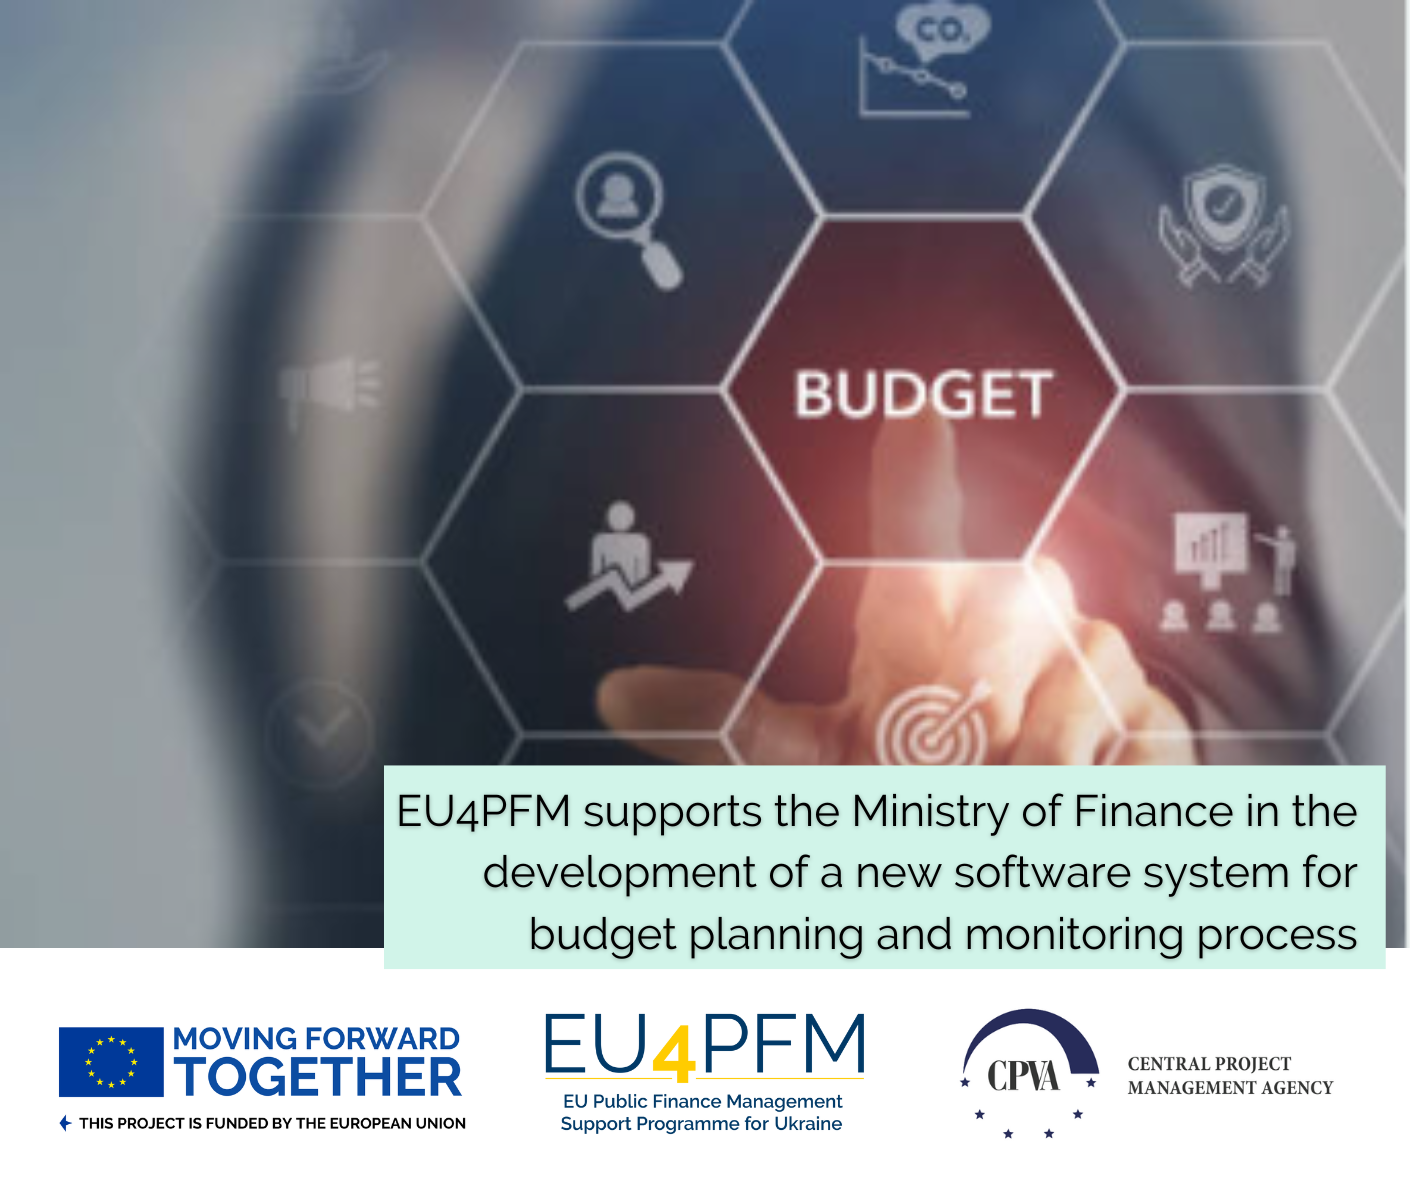 EU4PFM supports the Ministry of Finance of Ukraine in the development of a new software system for budget planning and monitoring process